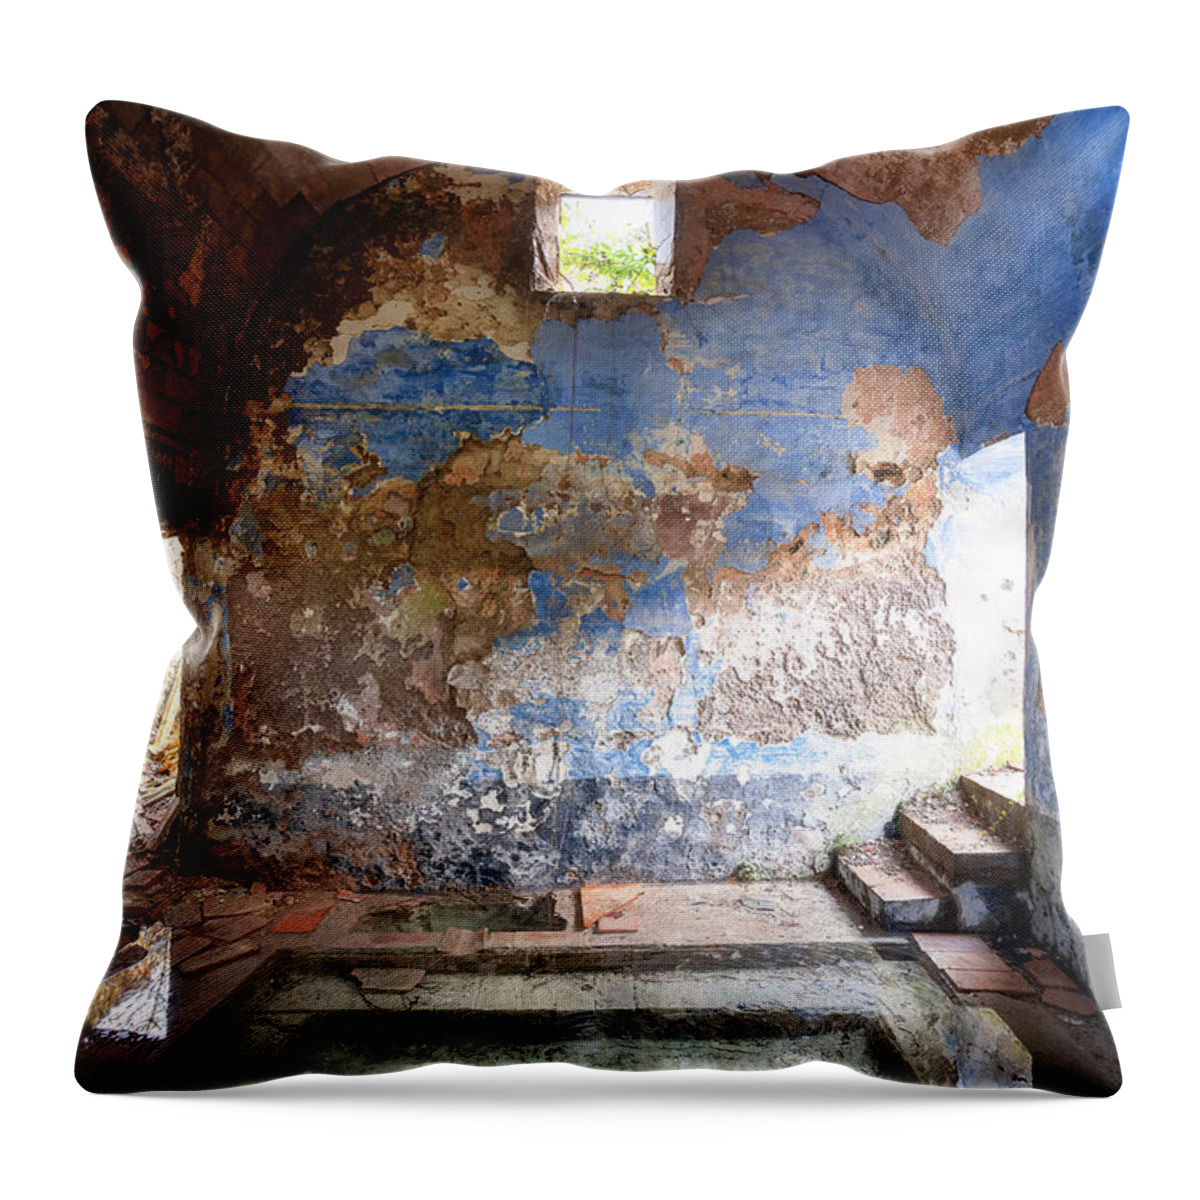 Urban Throw Pillow featuring the photograph Abandoned Spa with Water by Roman Robroek